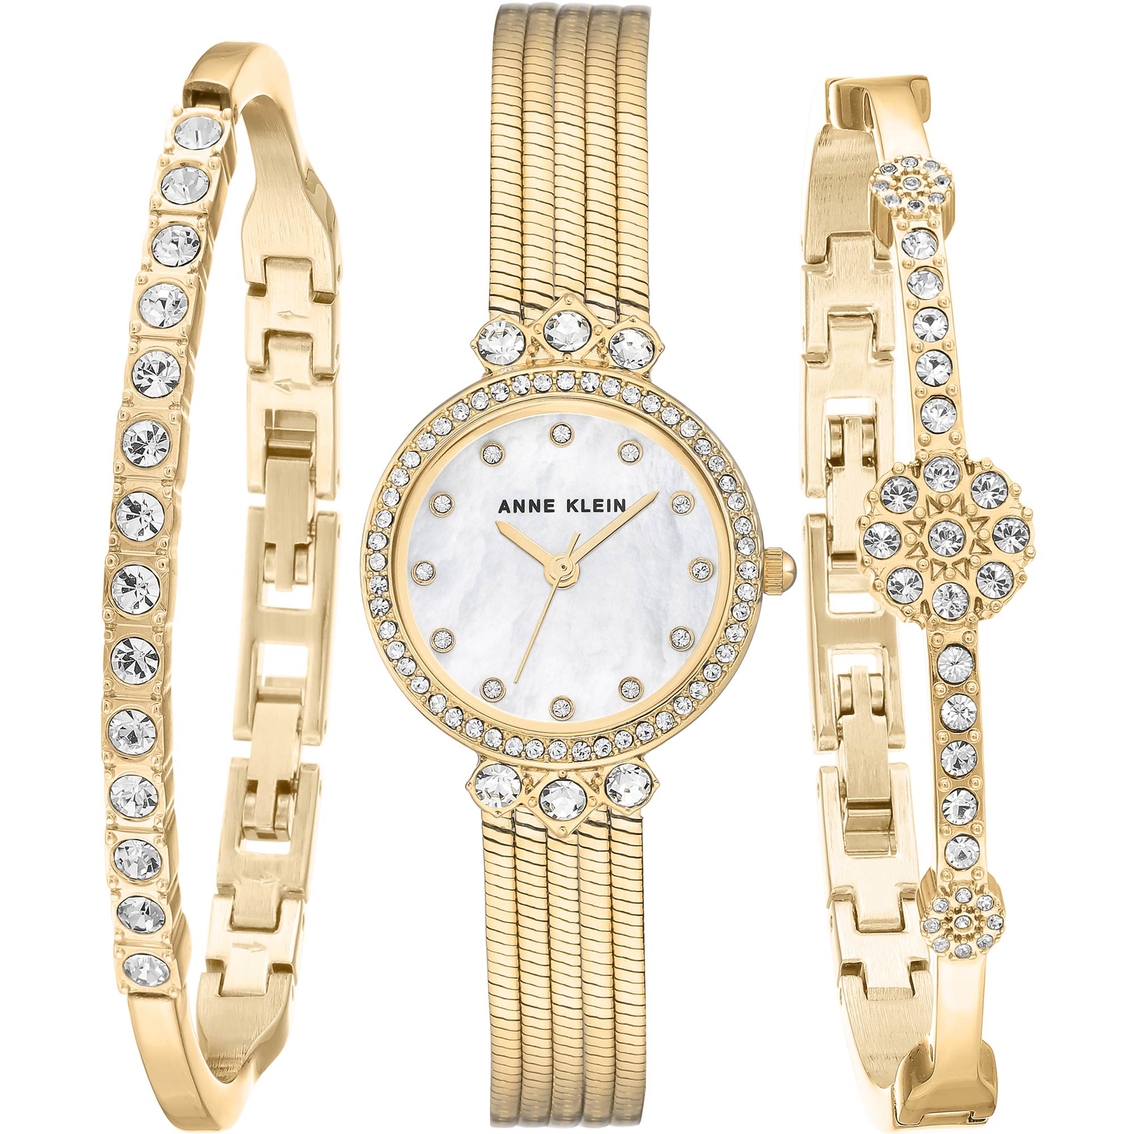 Anne Klein Women's Crystal Accented Chain Bracelet Watch And Bangle Set